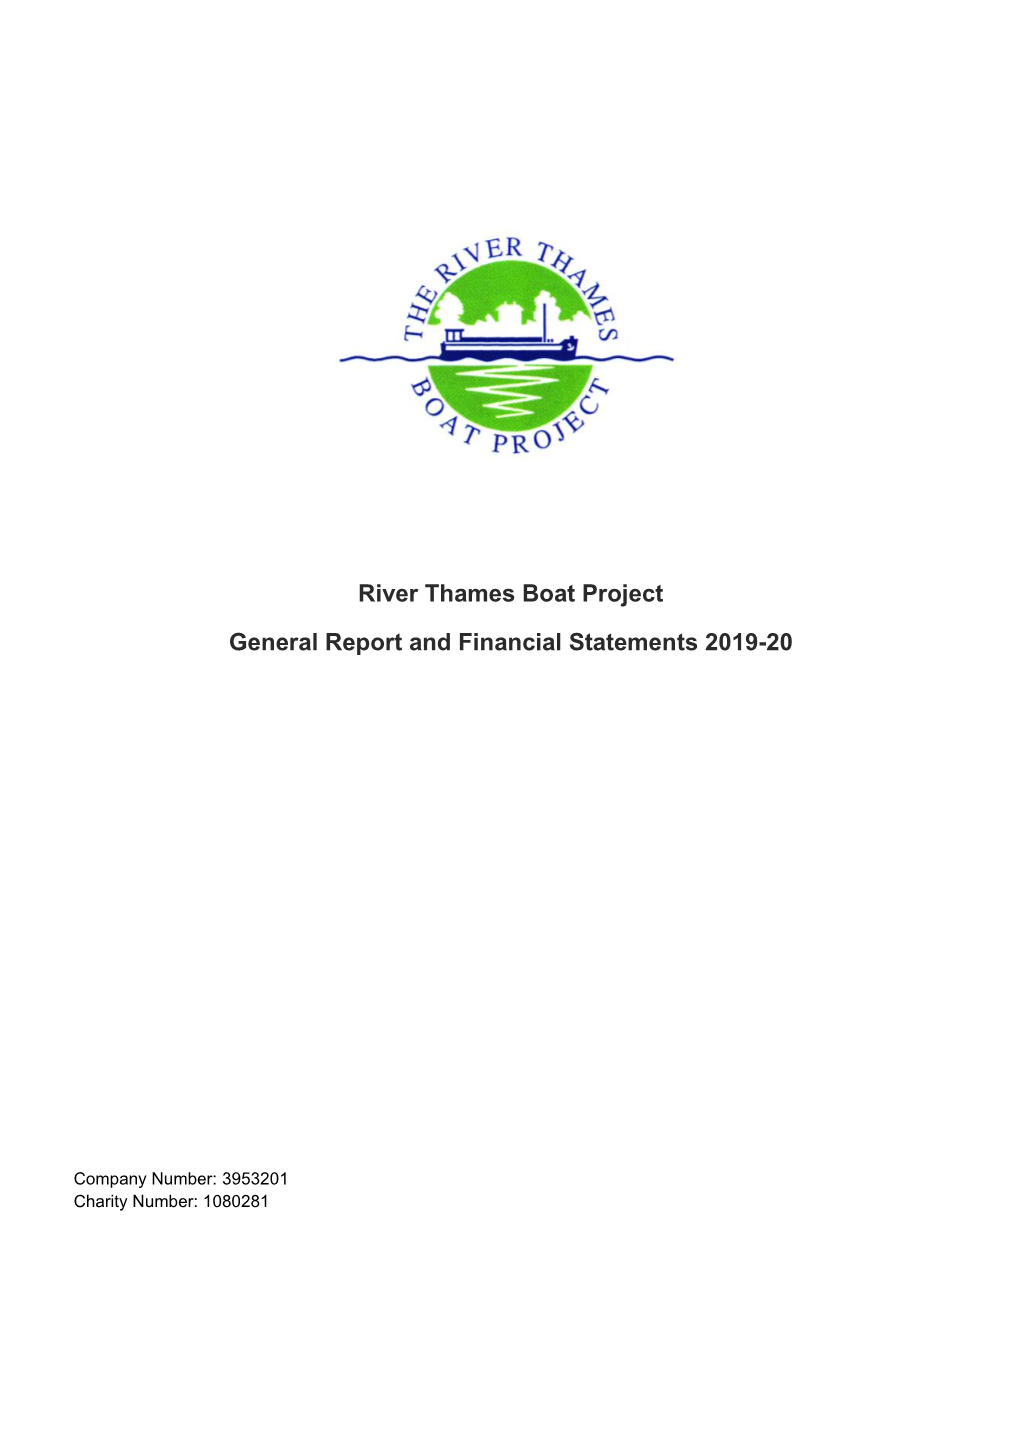 River Thames Boat Project General Report and Financial Statements